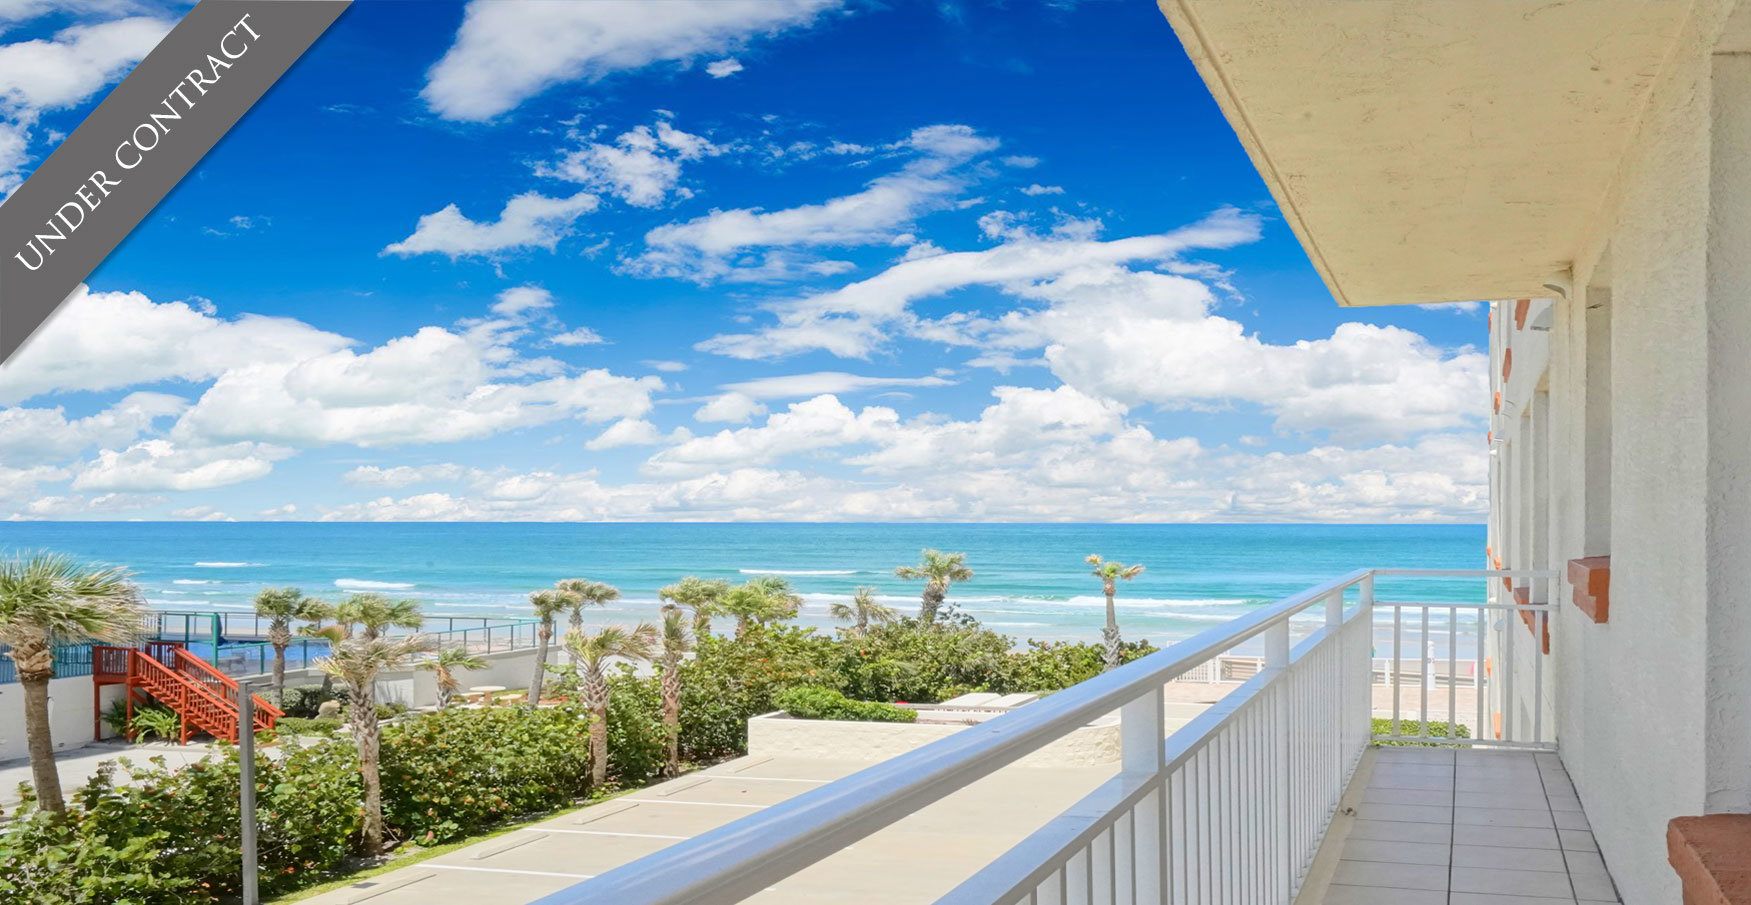 Opus Condos For Sale Oceanfront Real Estate at 2071 S Atlantic Ave Daytona Beach Shores, FL  Under Contract